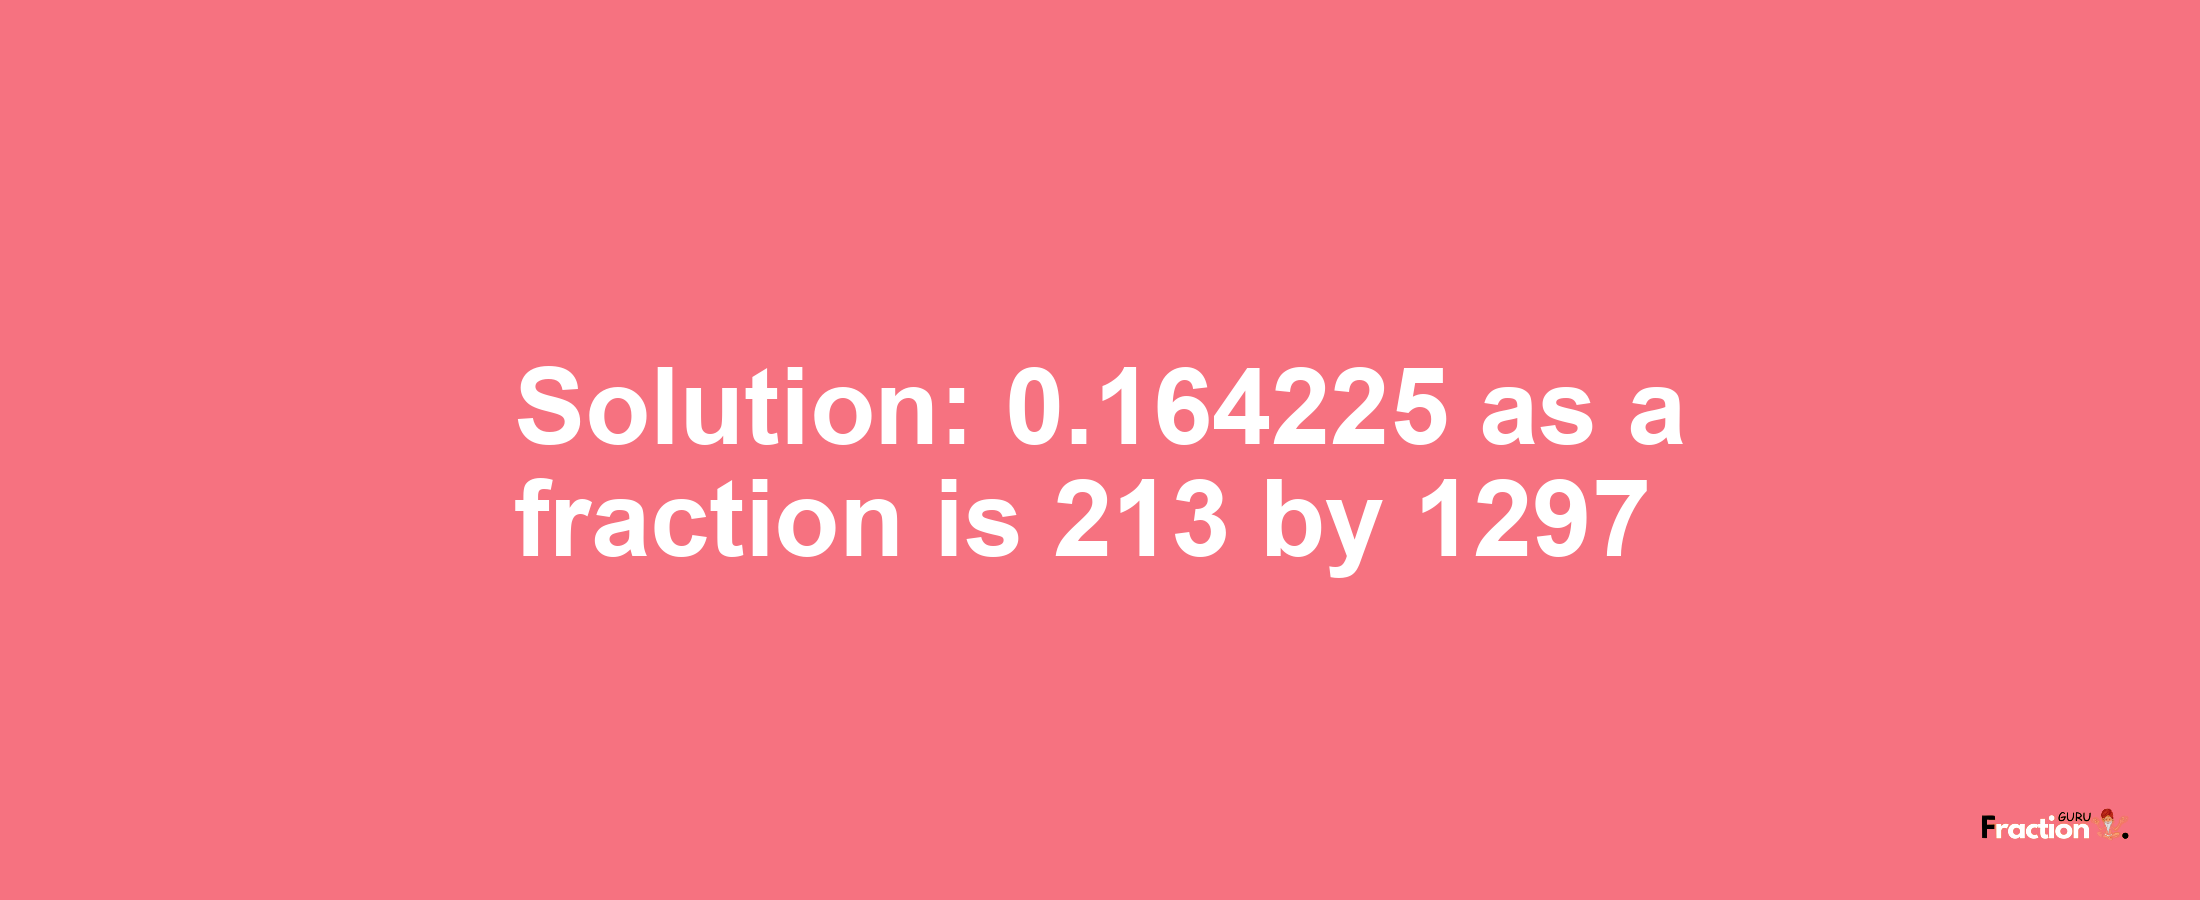 Solution:0.164225 as a fraction is 213/1297